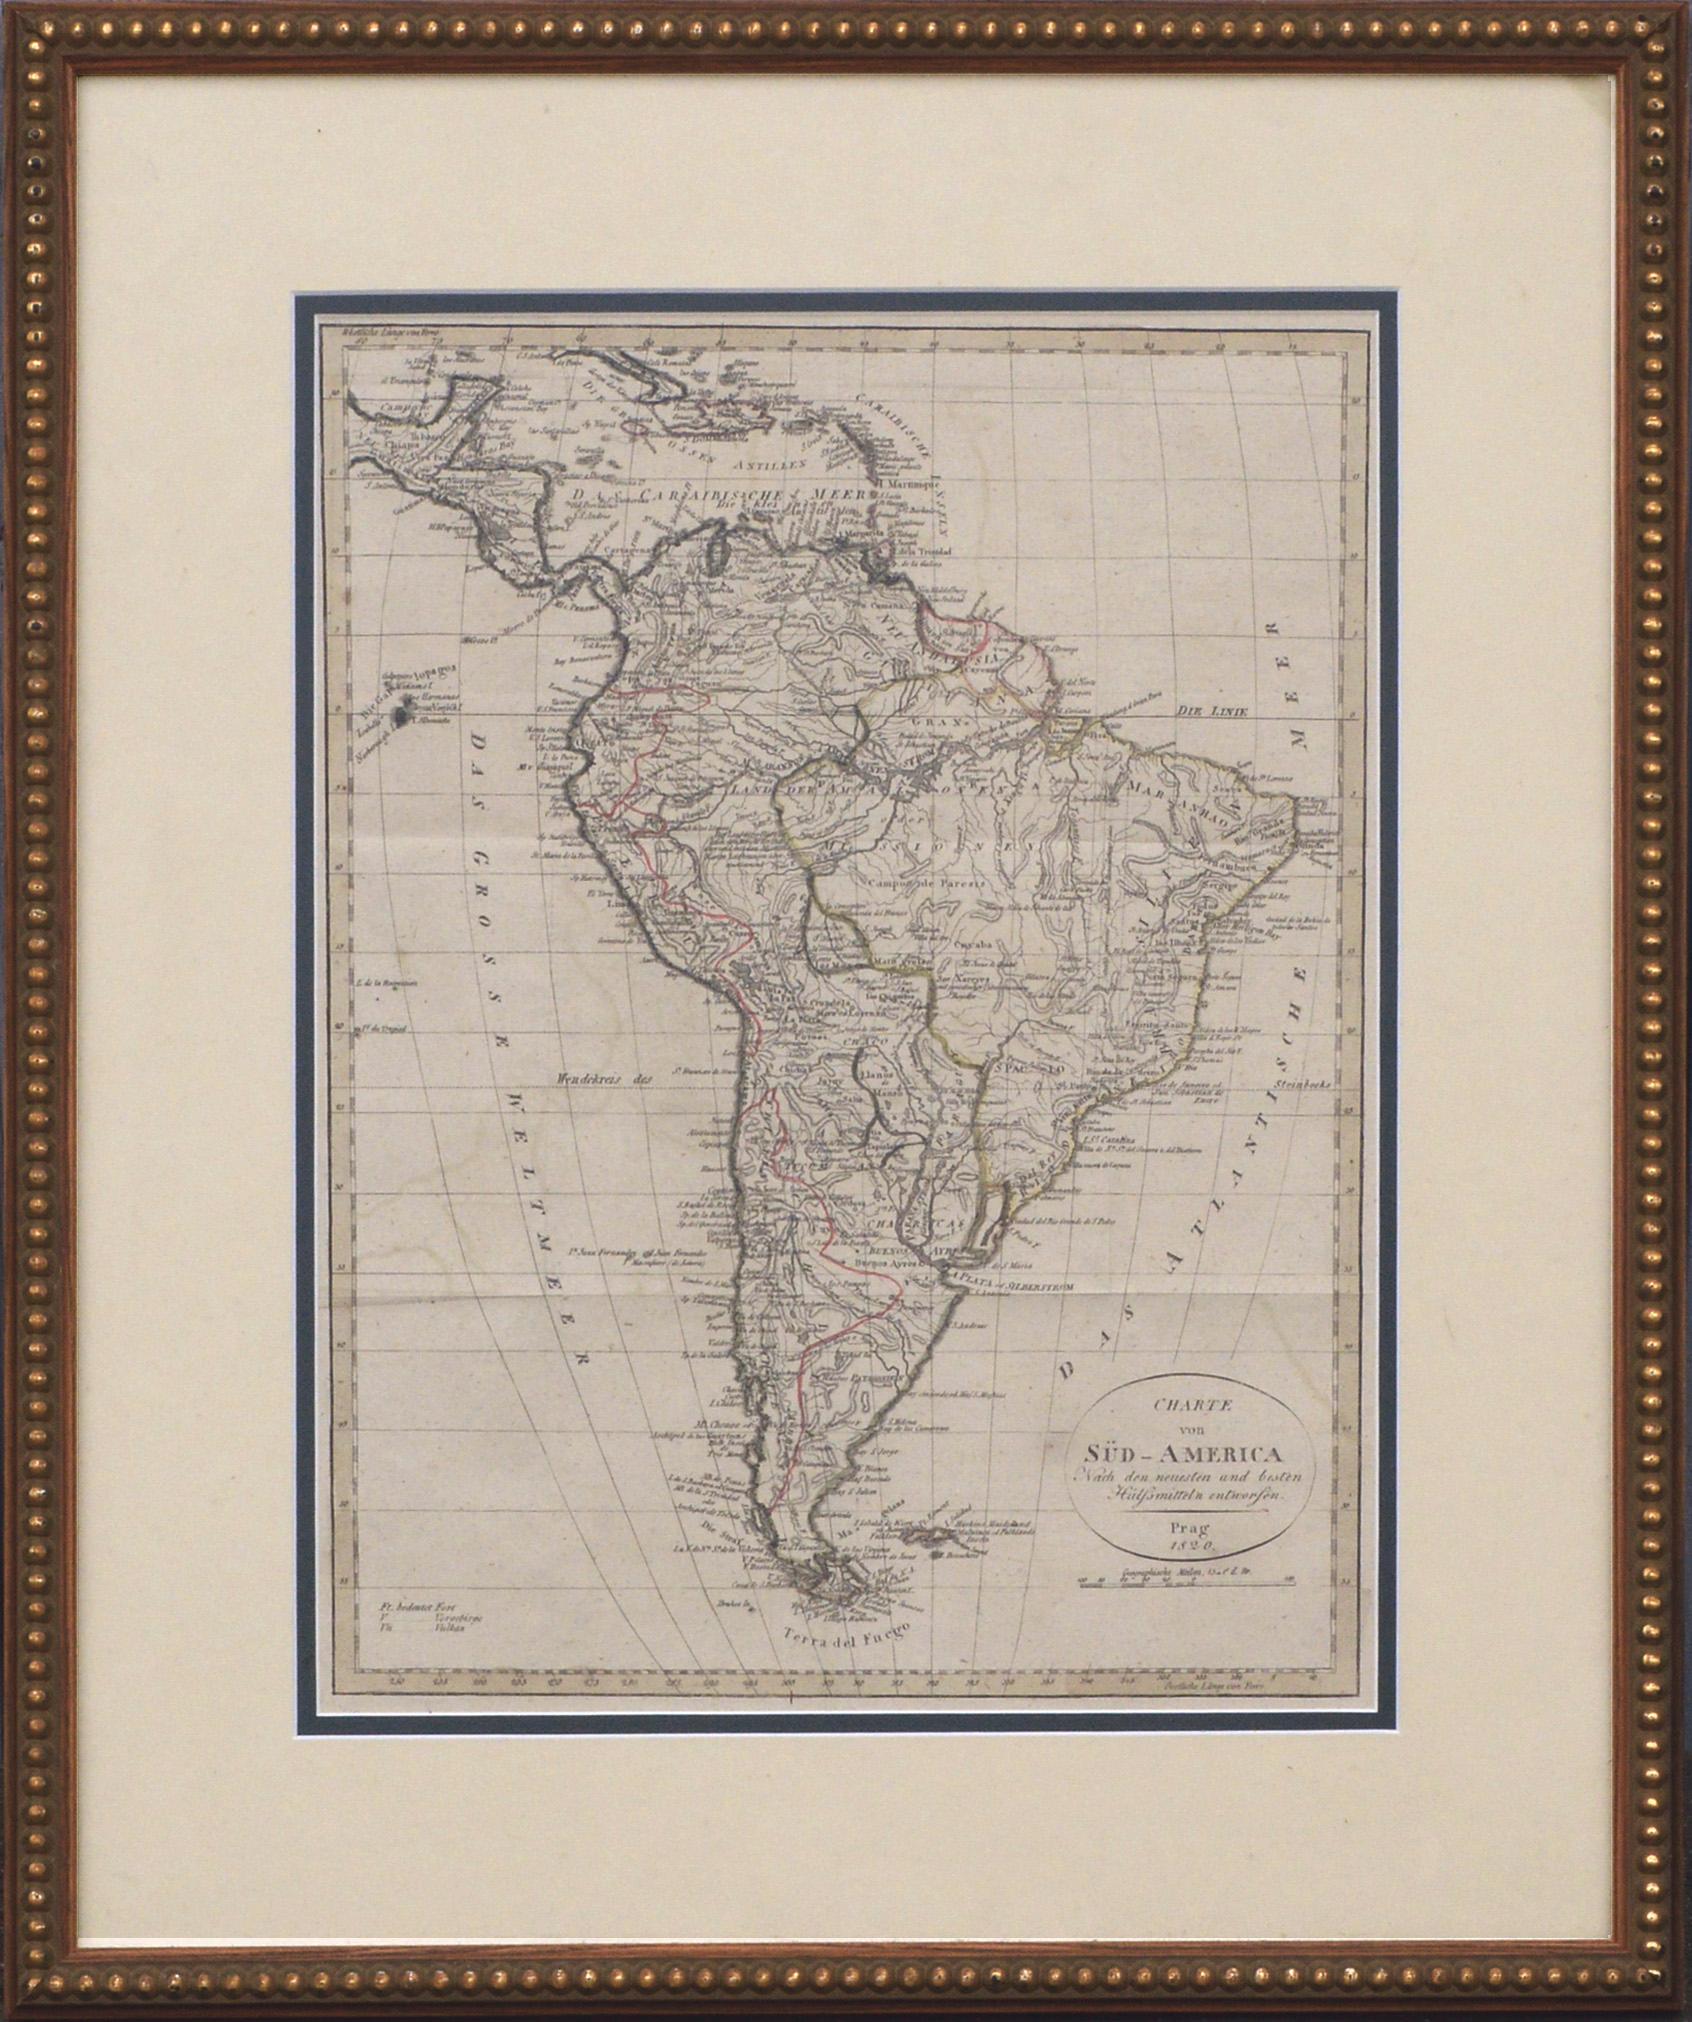 Franz Pluth Print - Charte von Sud-America (Map of South America) - Etching with Hand-Drawn Outlines